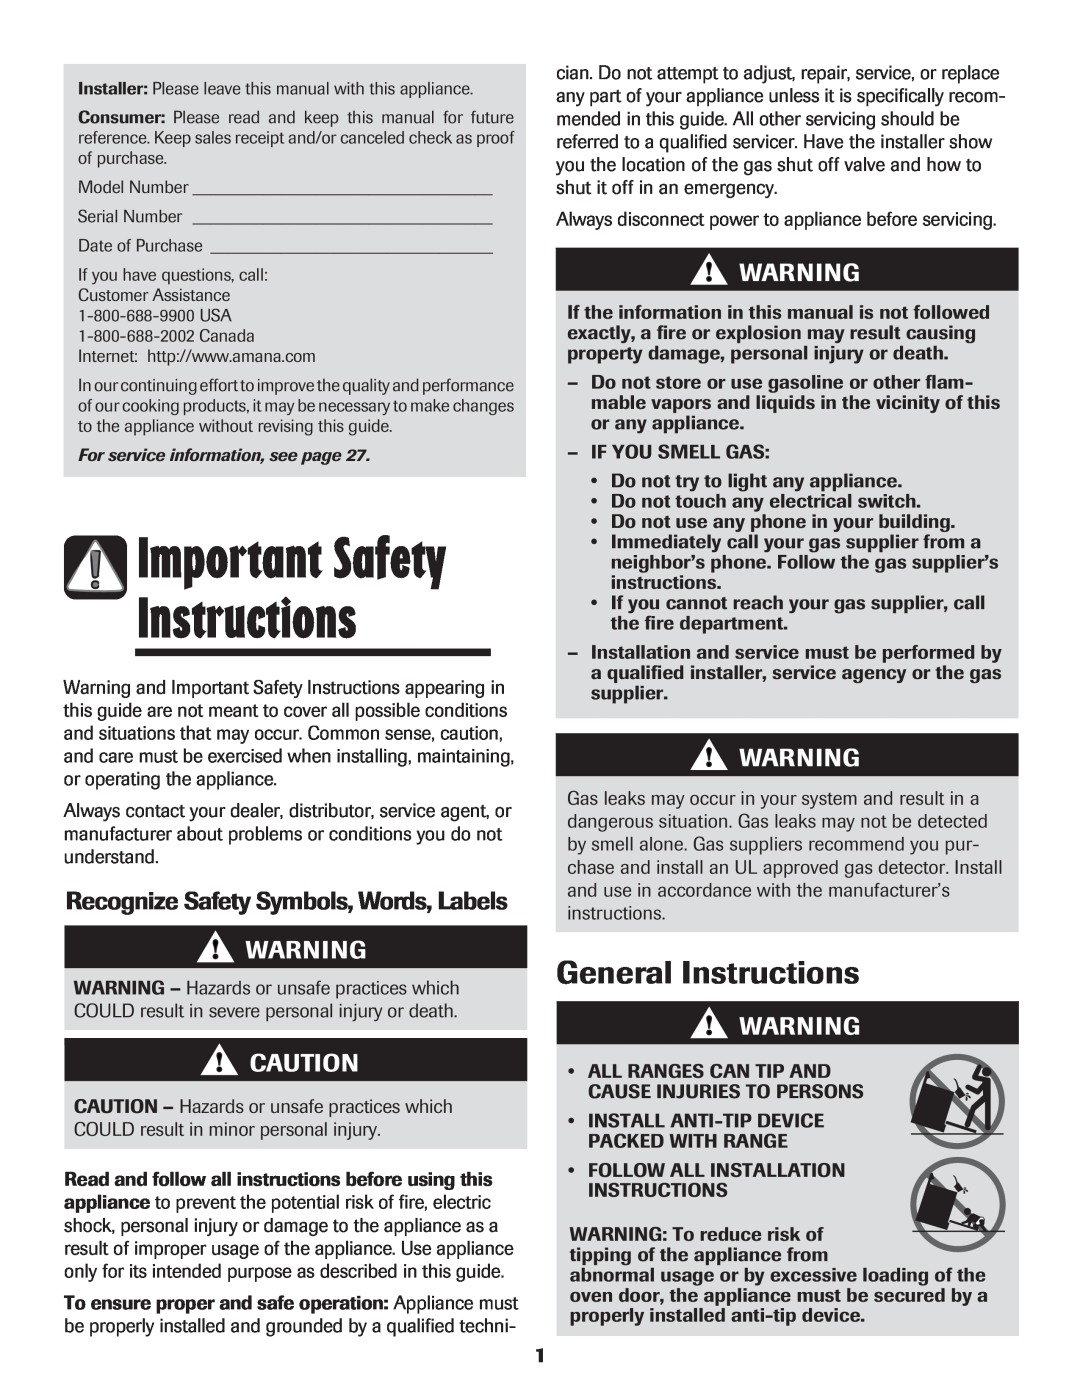 Amana AGR5835QDW Important Safety, General Instructions, Recognize Safety Symbols, Words, Labels 